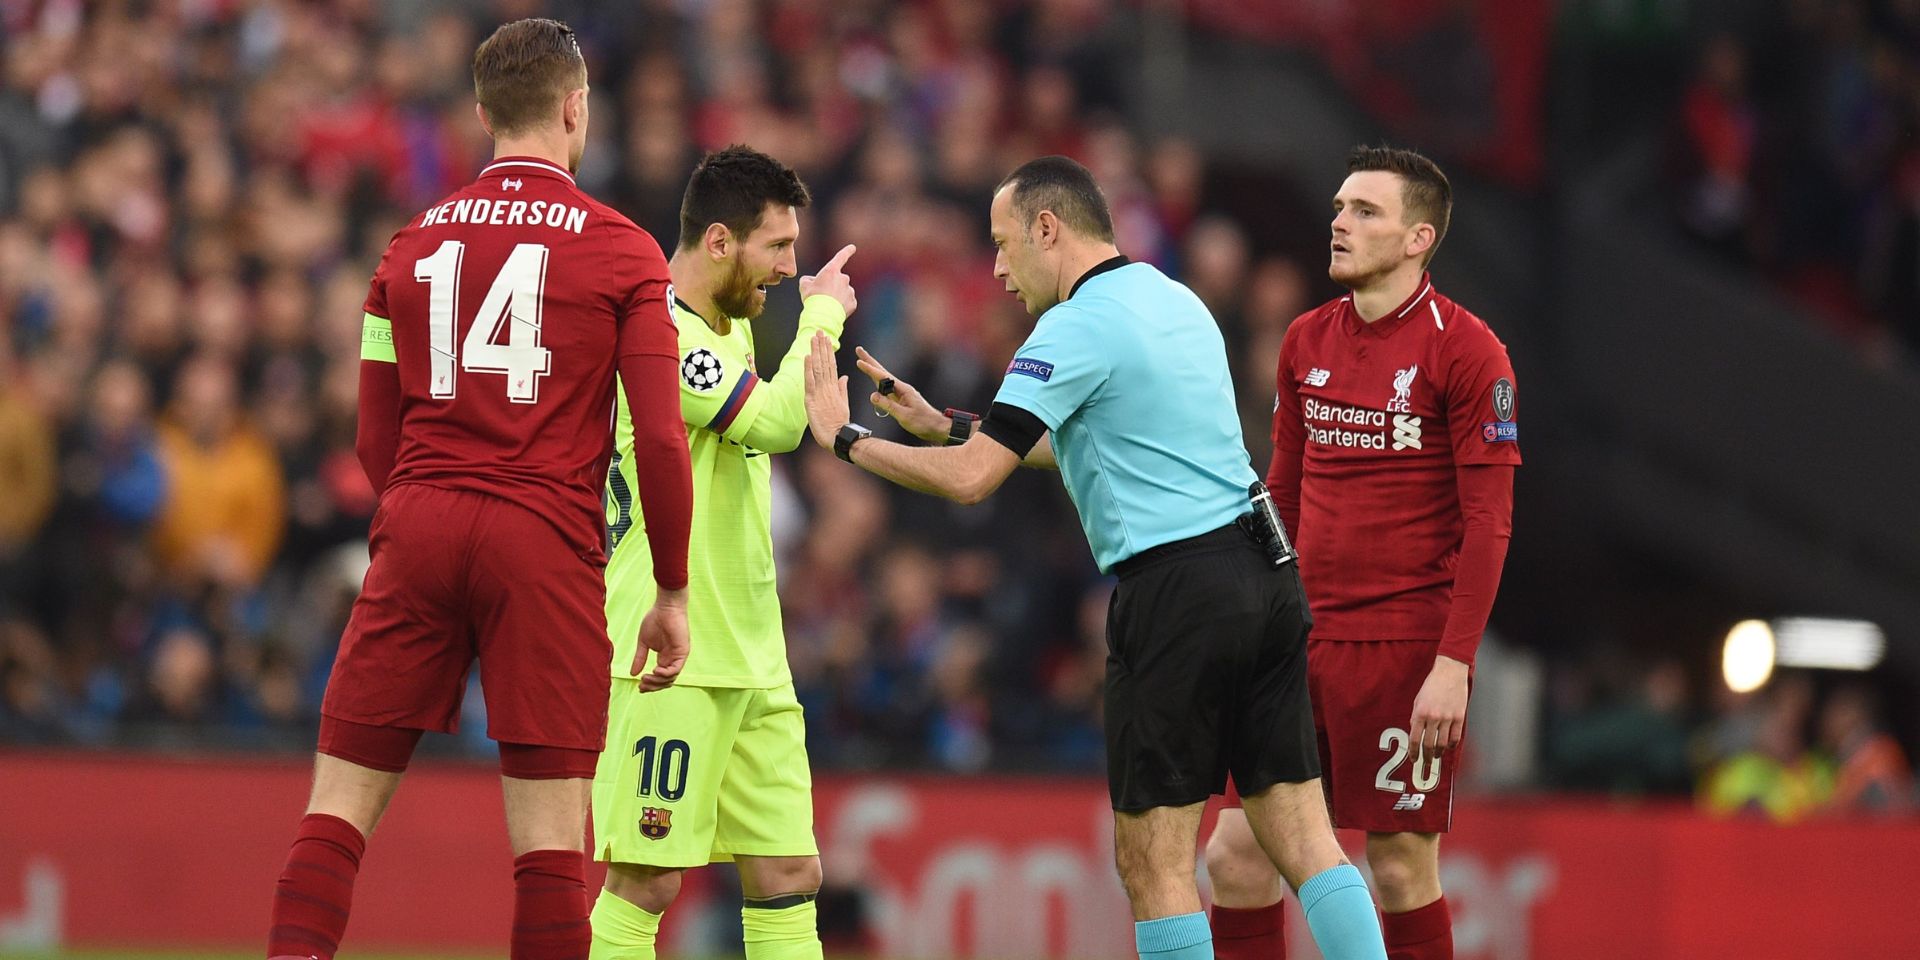 (Video) Achterberg x-rated assessment of ‘diving’ Messi and love for Robertson reaction